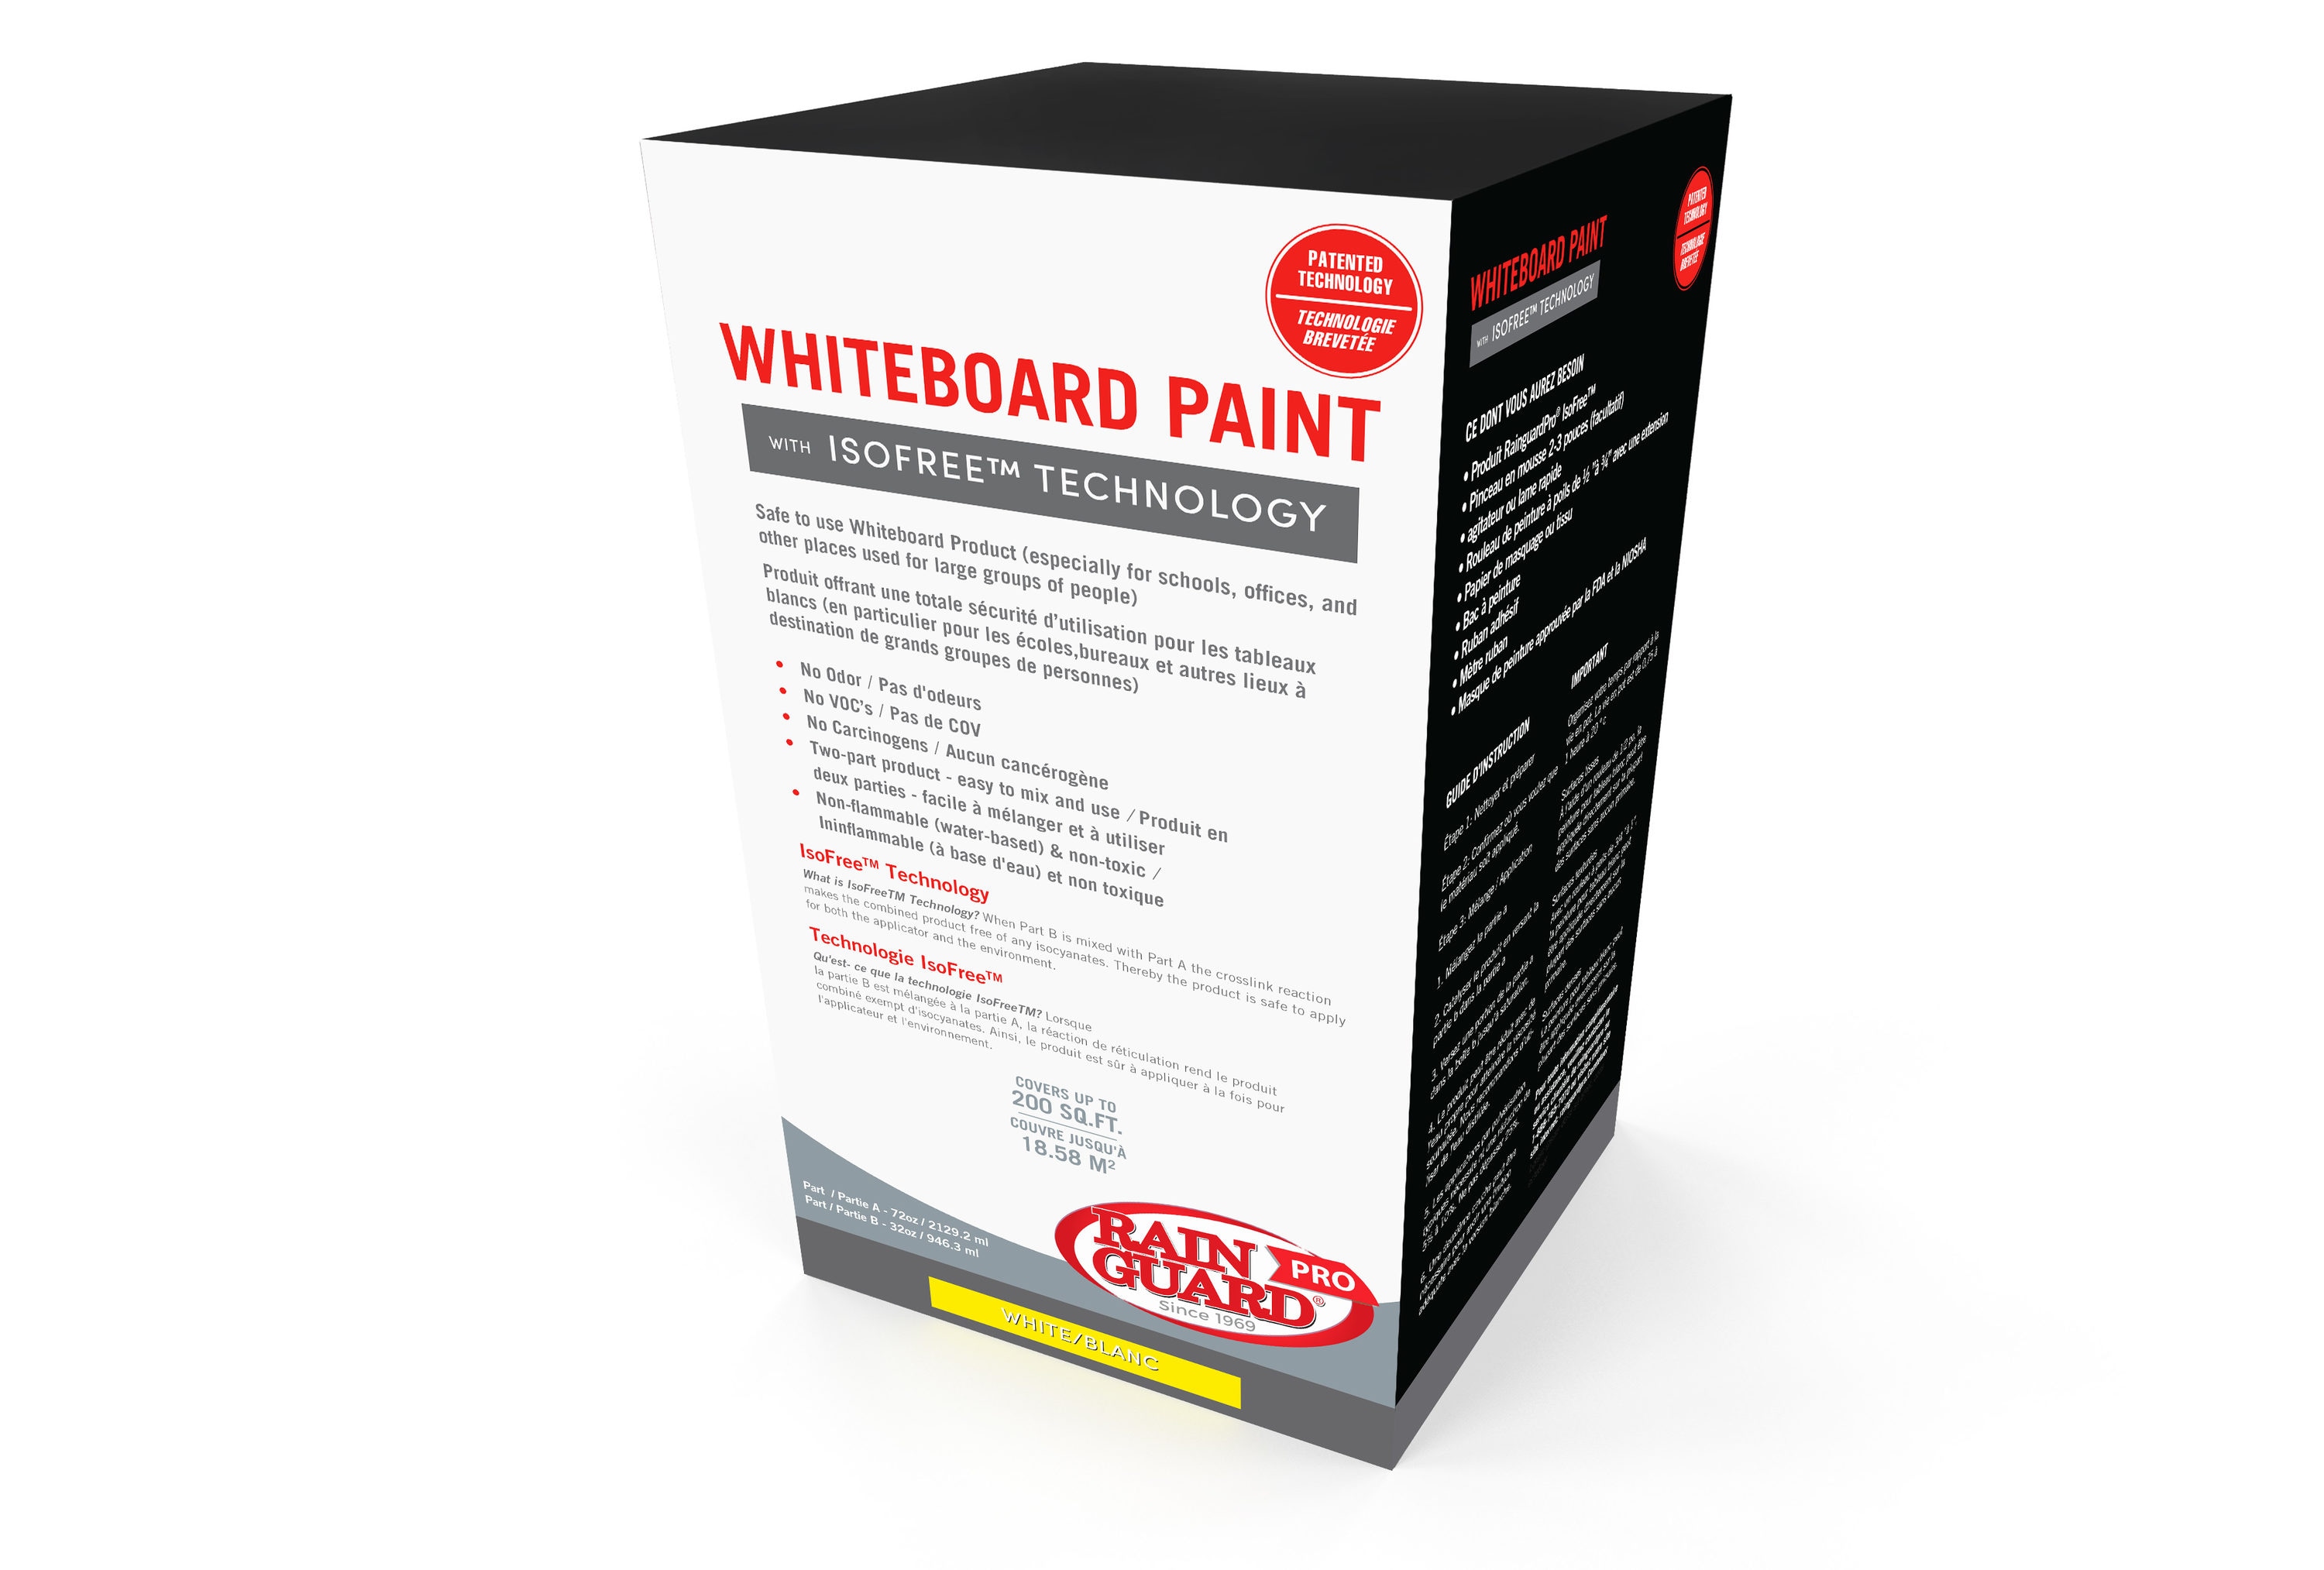 Whiteboard Paint - 6sqm coverage